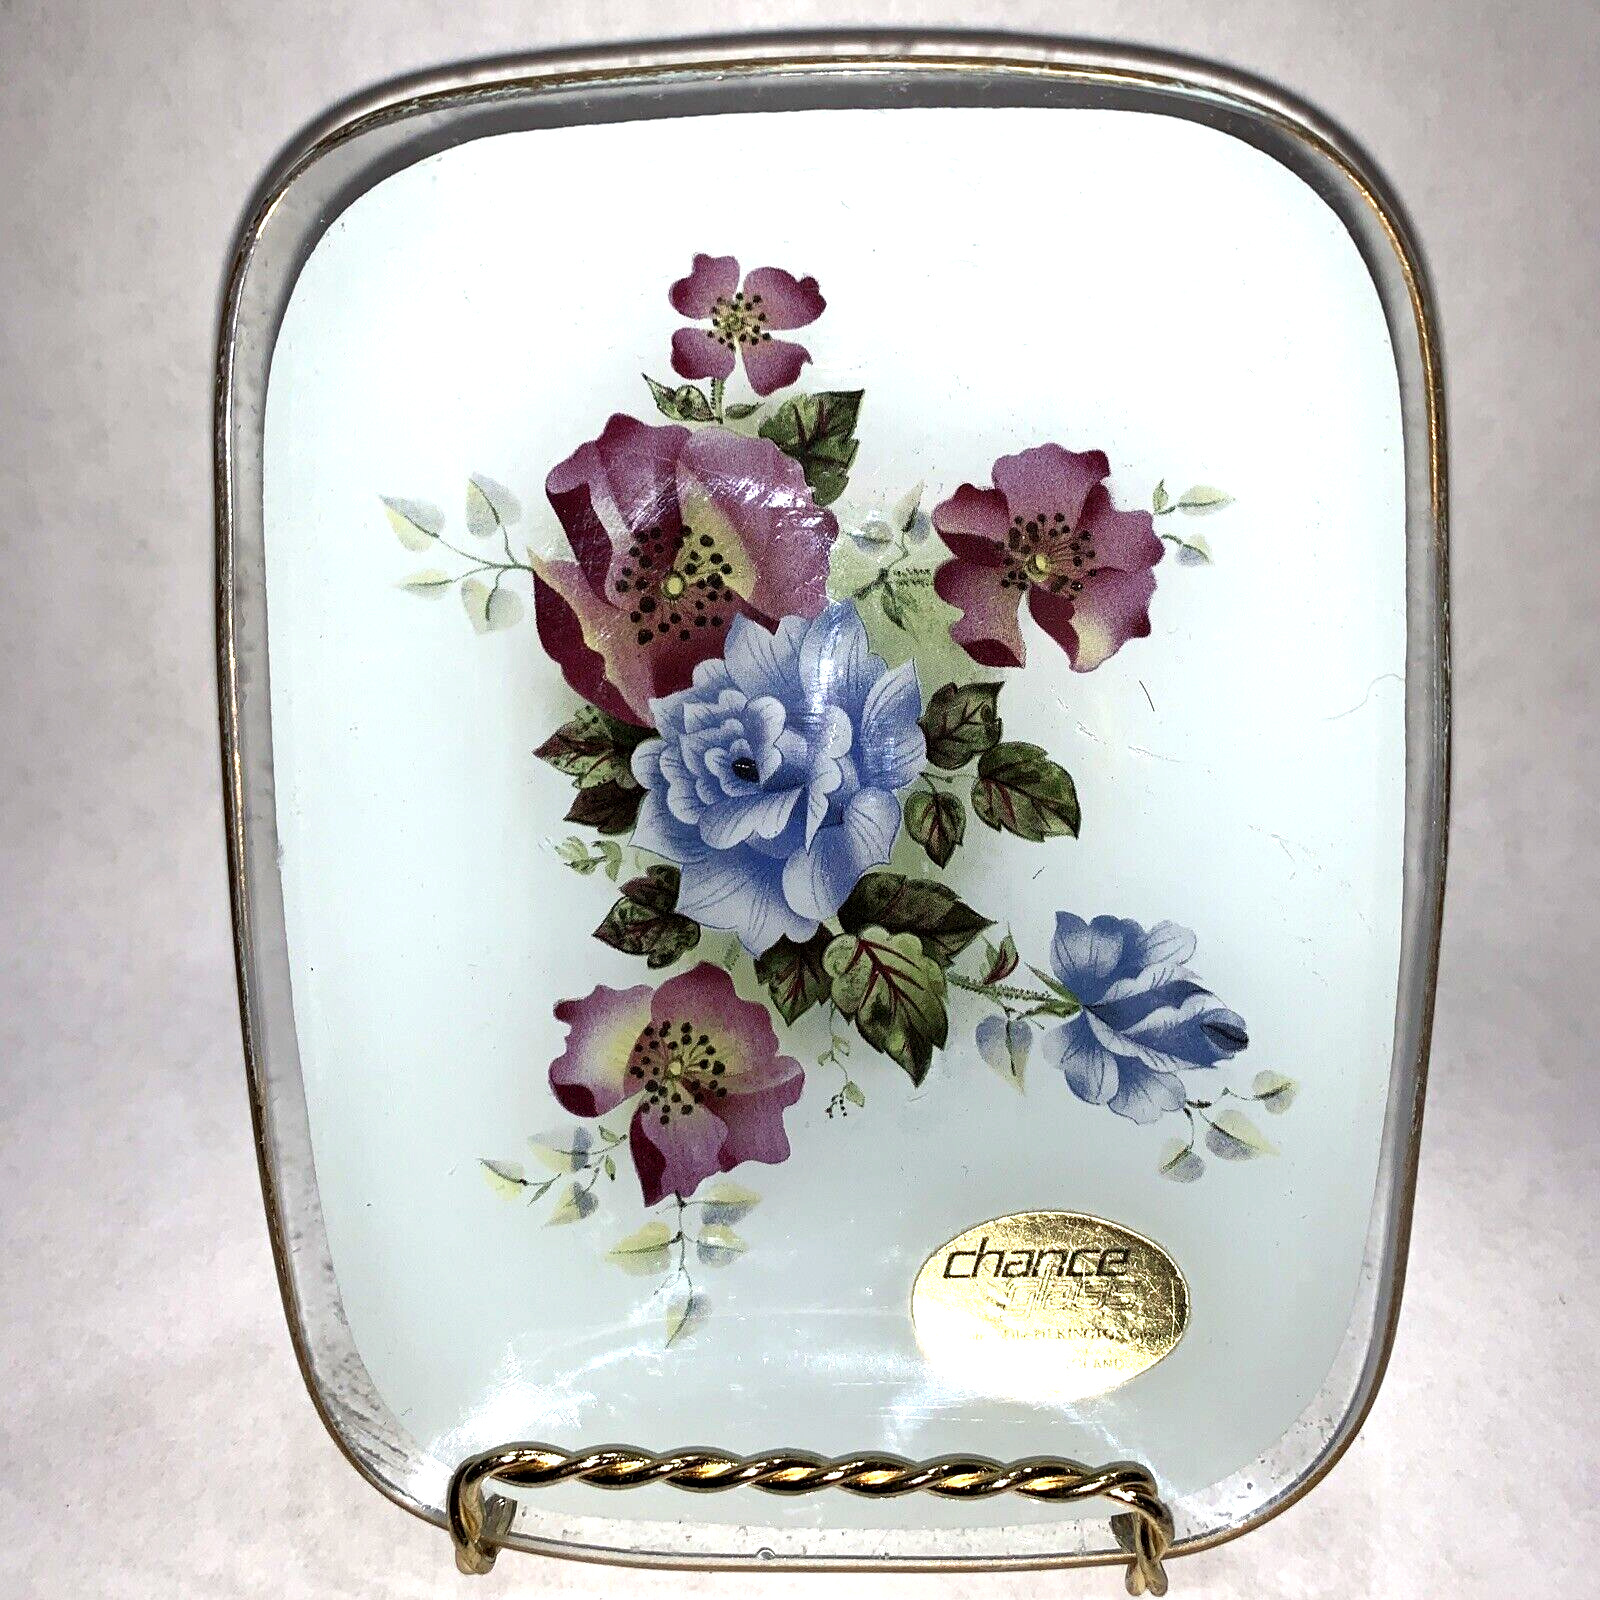 Chance Glass Floral Design Trinket Dish Frosted & Clear Glass Gold Trim